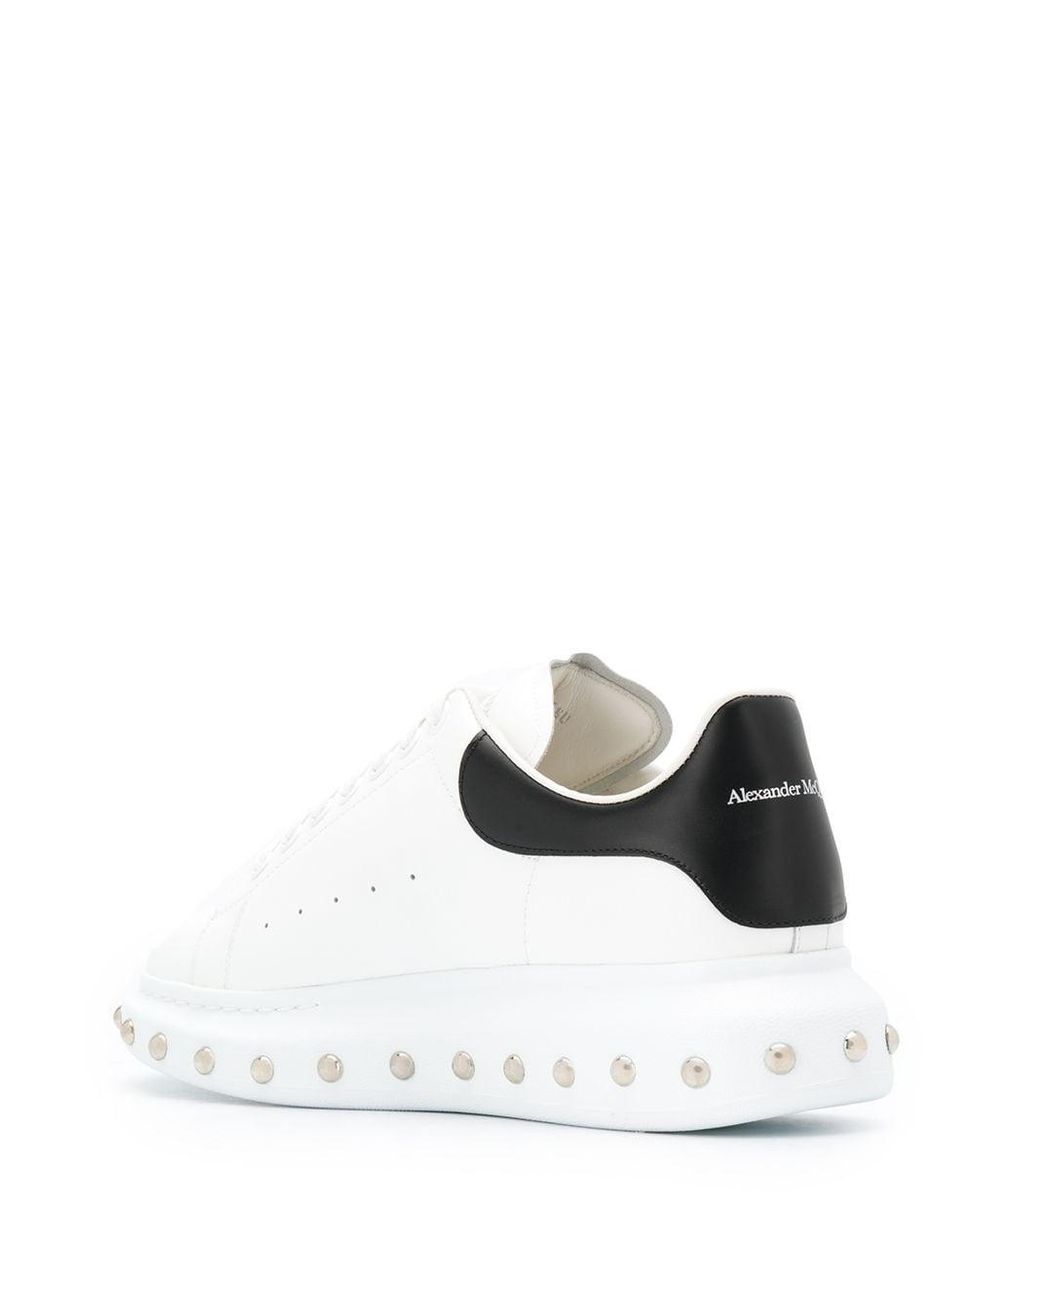 Limited edition stud-embellished ALEXANDER MCQUEEN Oversized Sneakers,  Women's Fashion, Footwear, Sneakers on Carousell